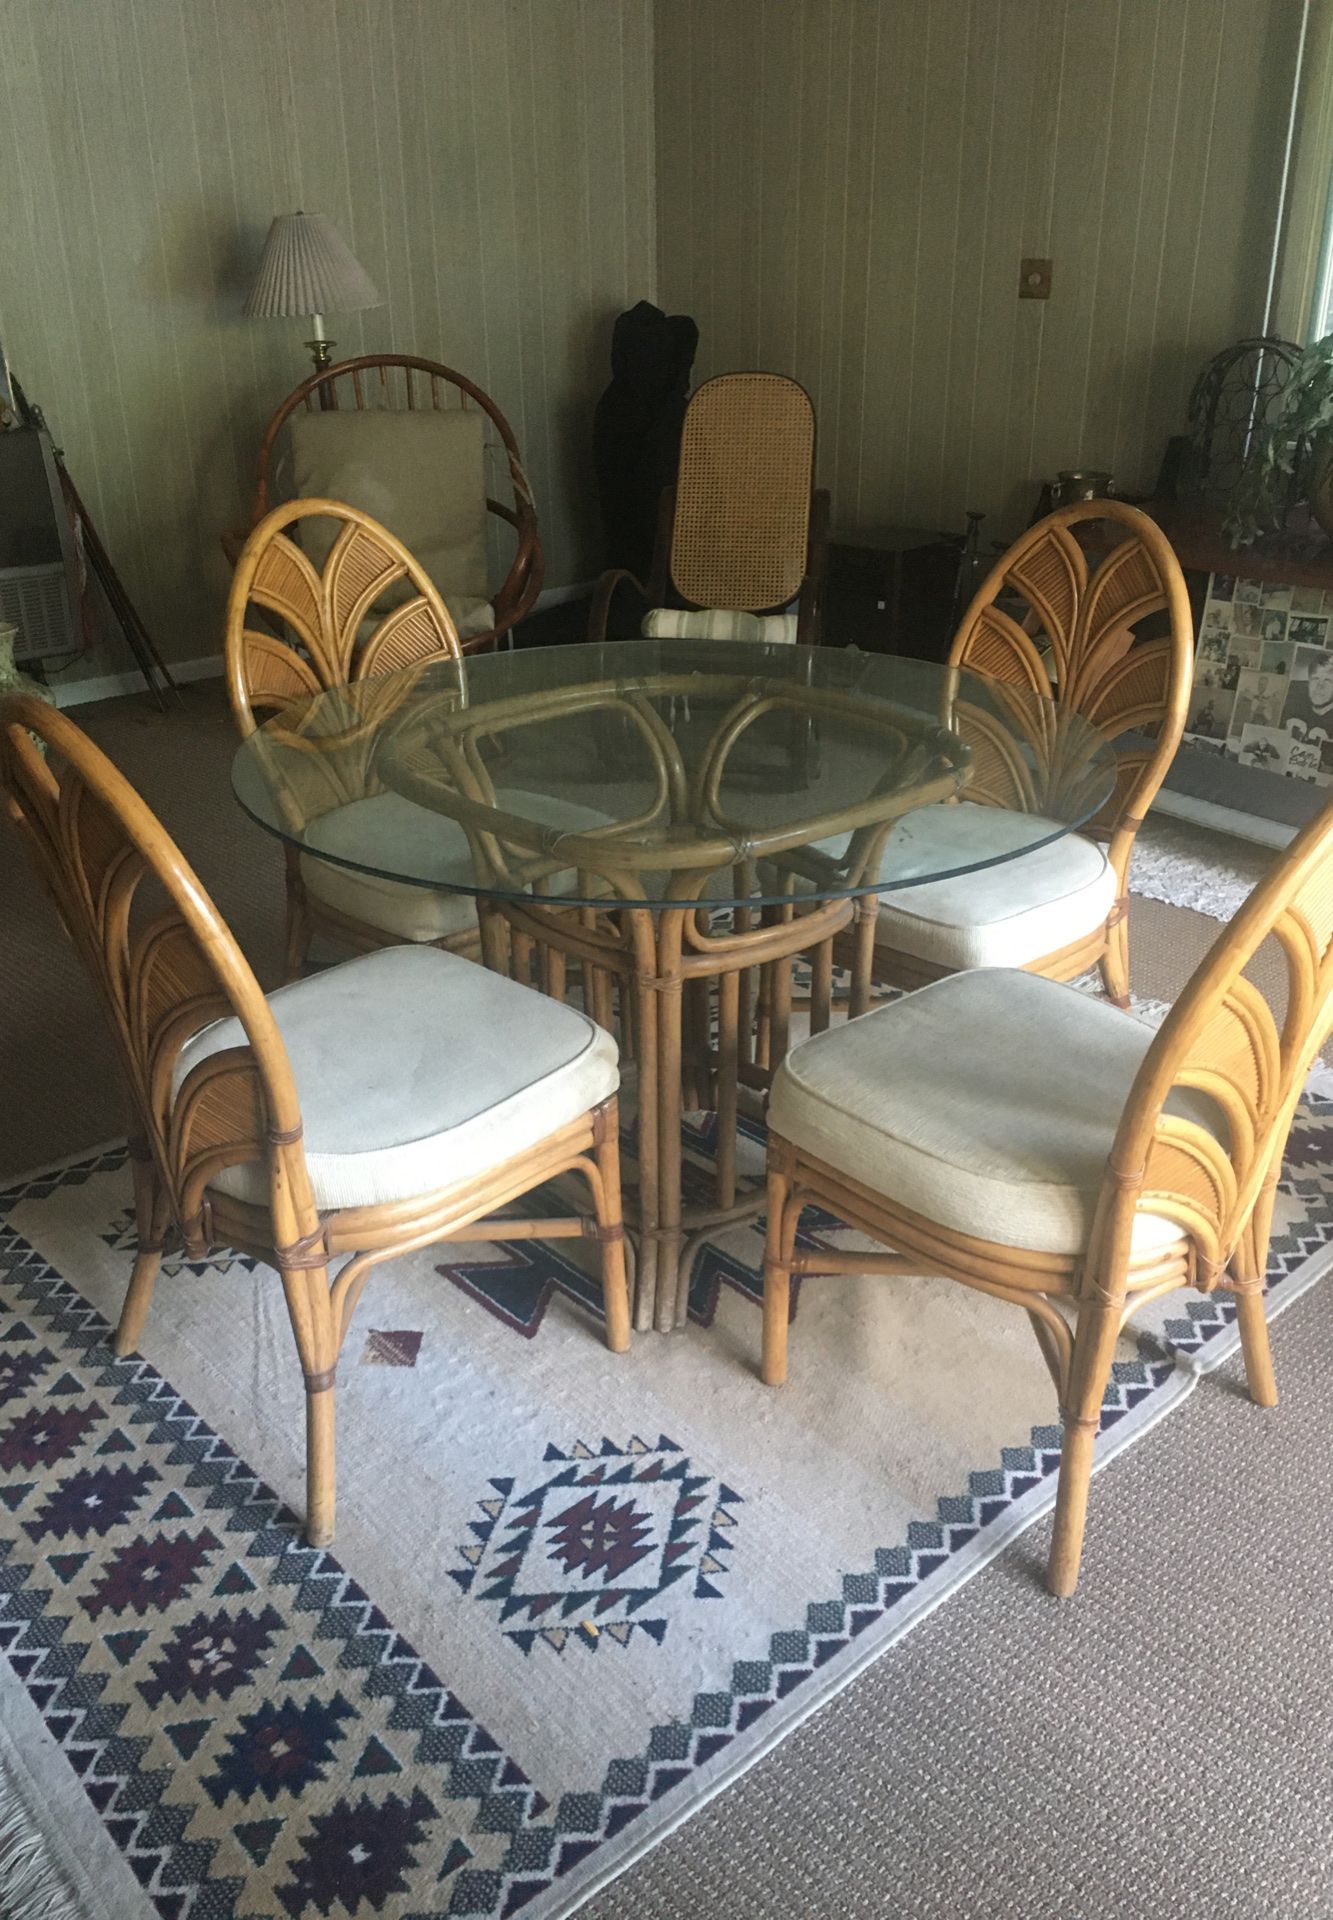 Glass table with four chairs